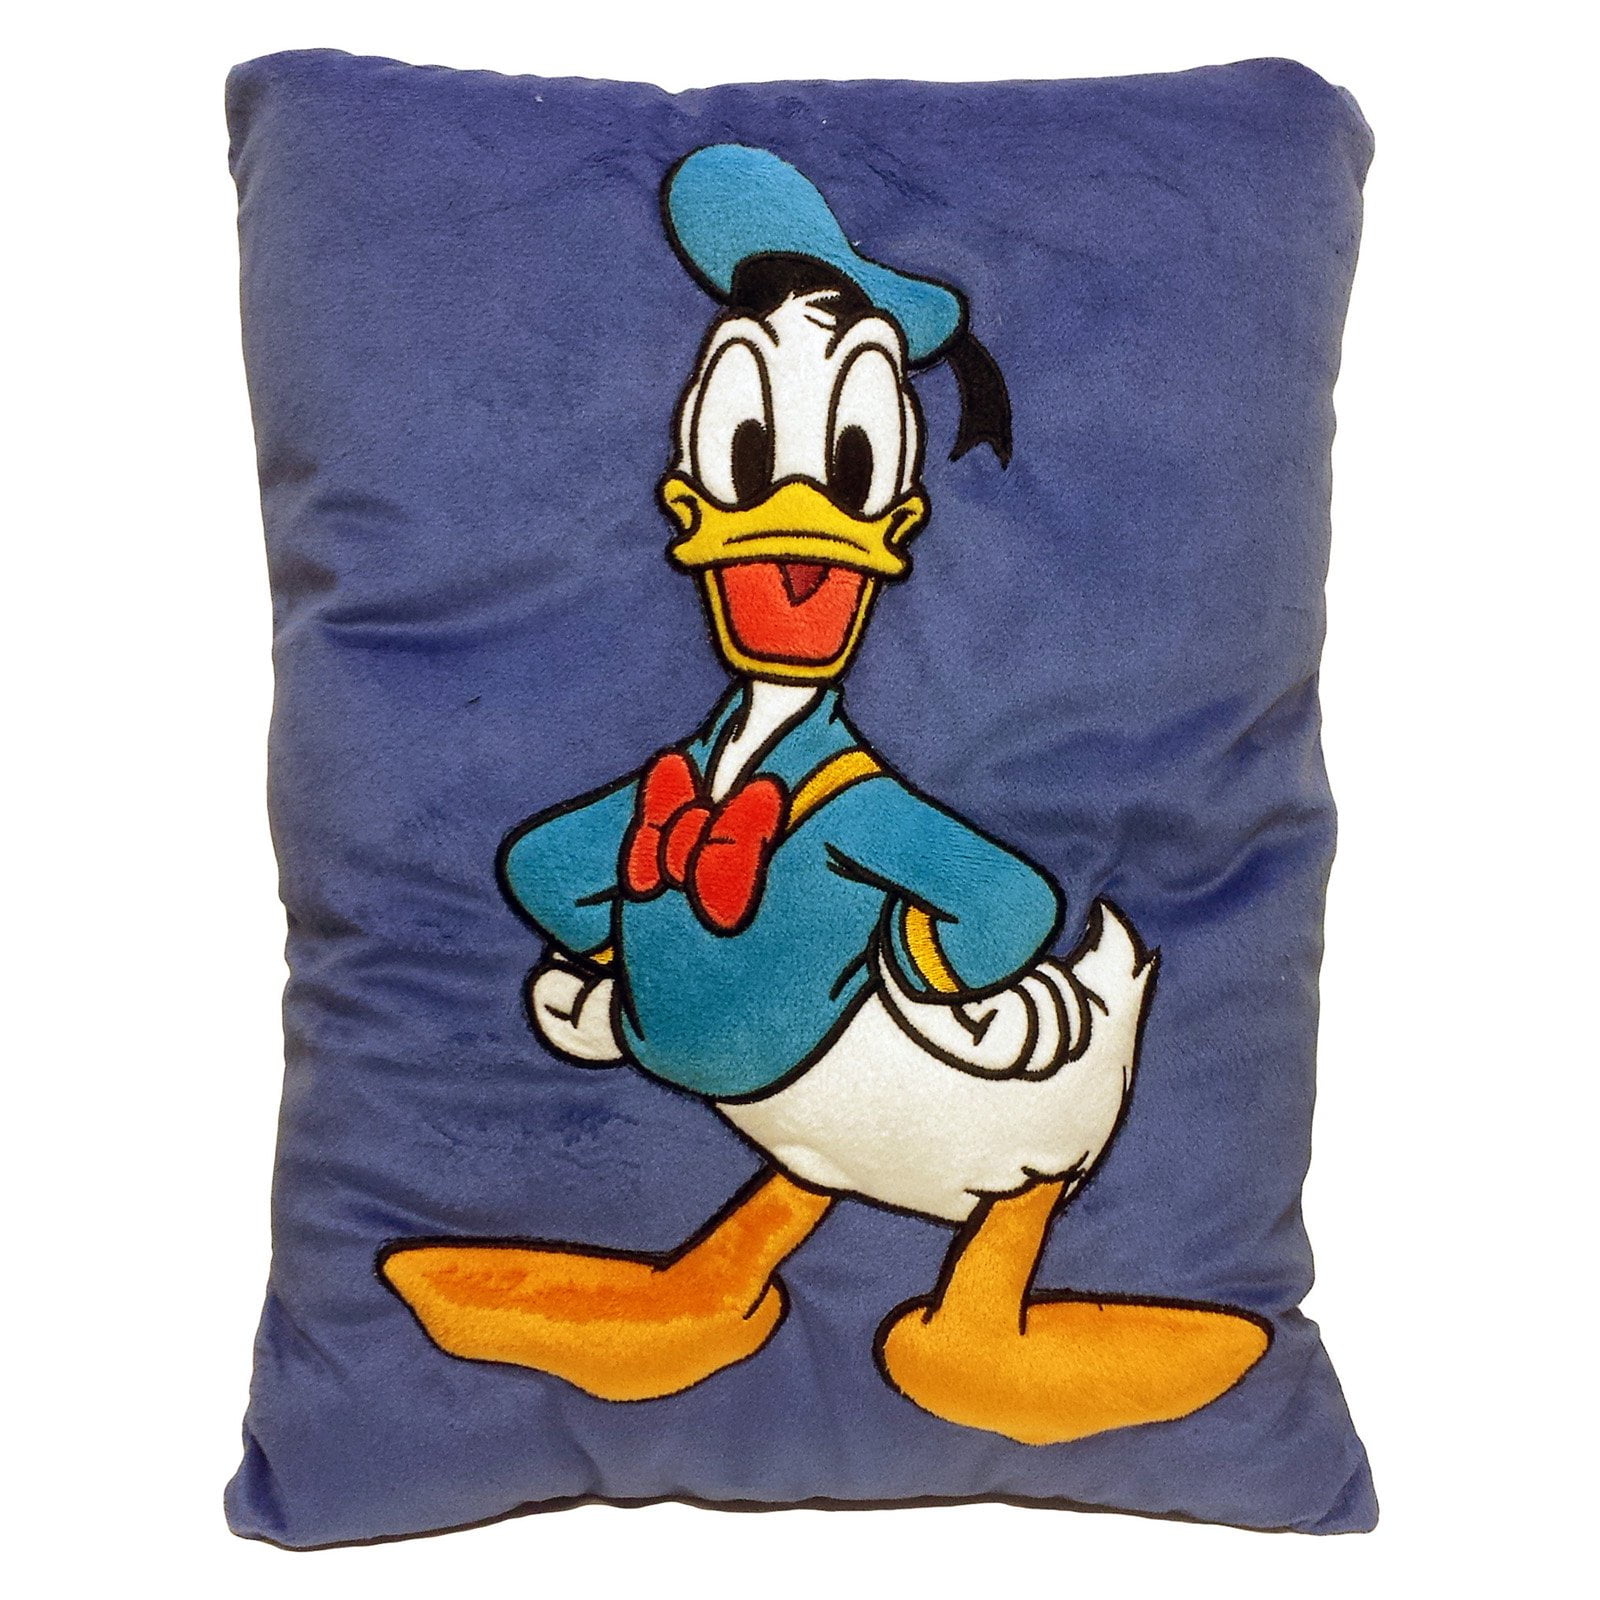 DISNEY LICENSED DONALD DUCK KIDS BLUE PILLOW CUSHION 45x45cm **FREE DELIVERY** 